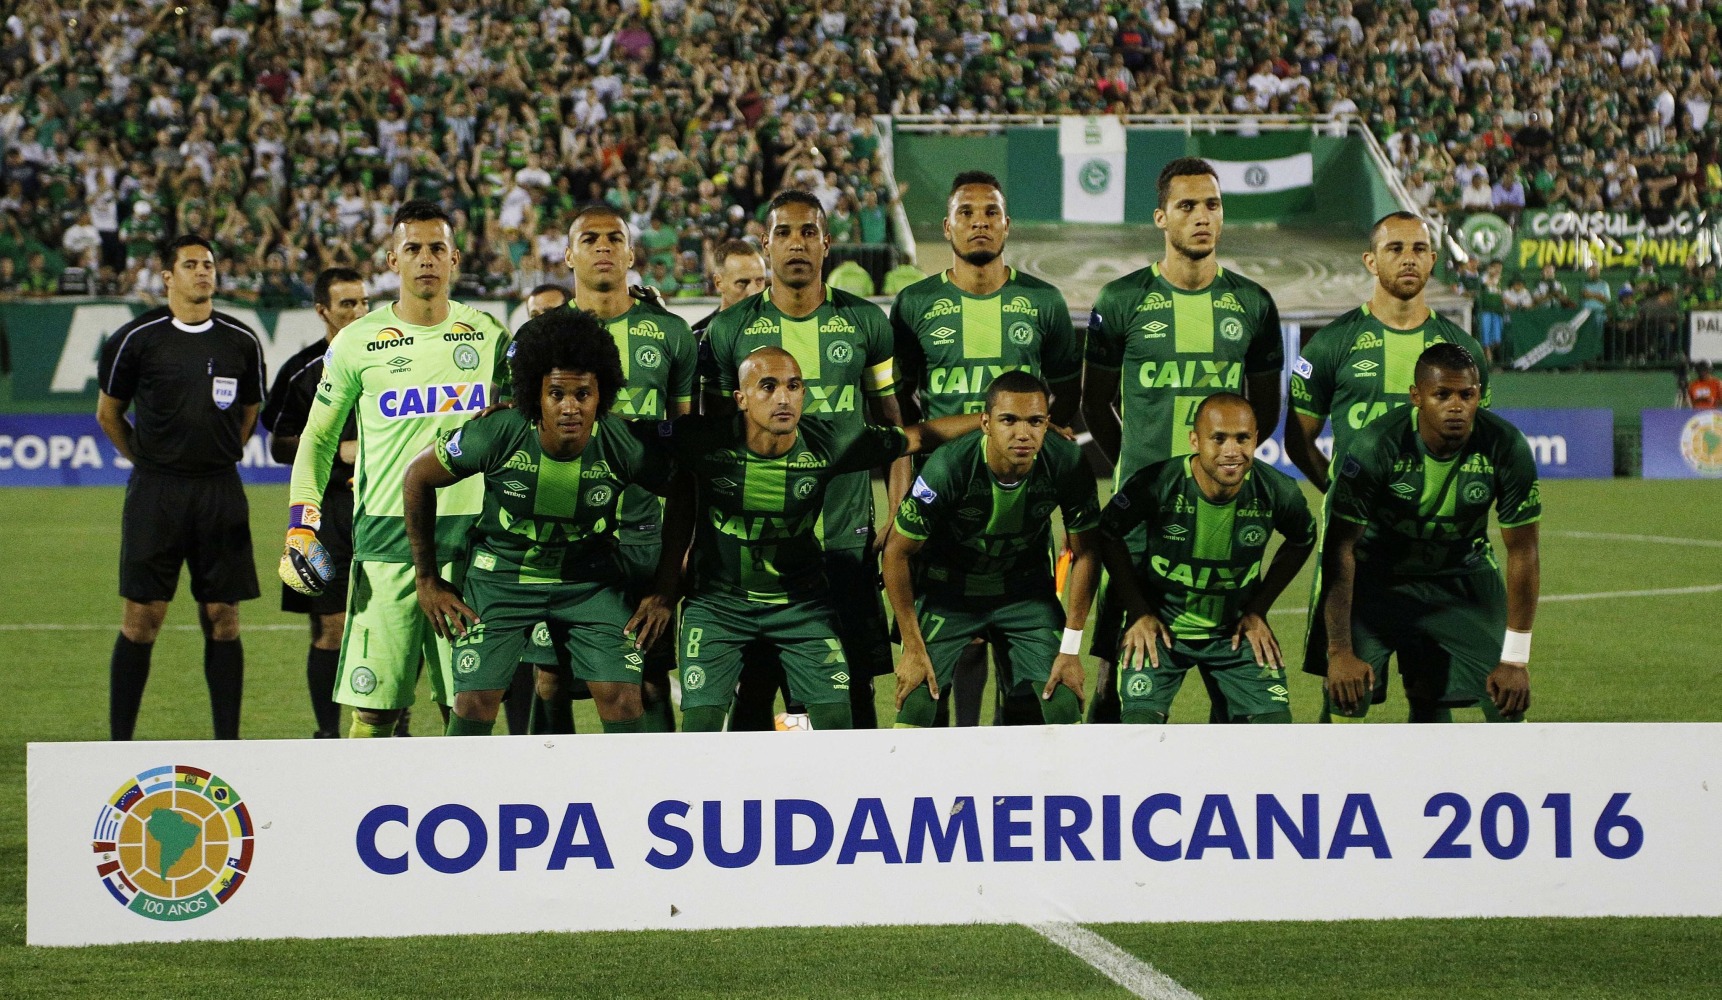 Plane Carrying Brazil's Chapecoense Soccer Team Crashes in Colombia ...